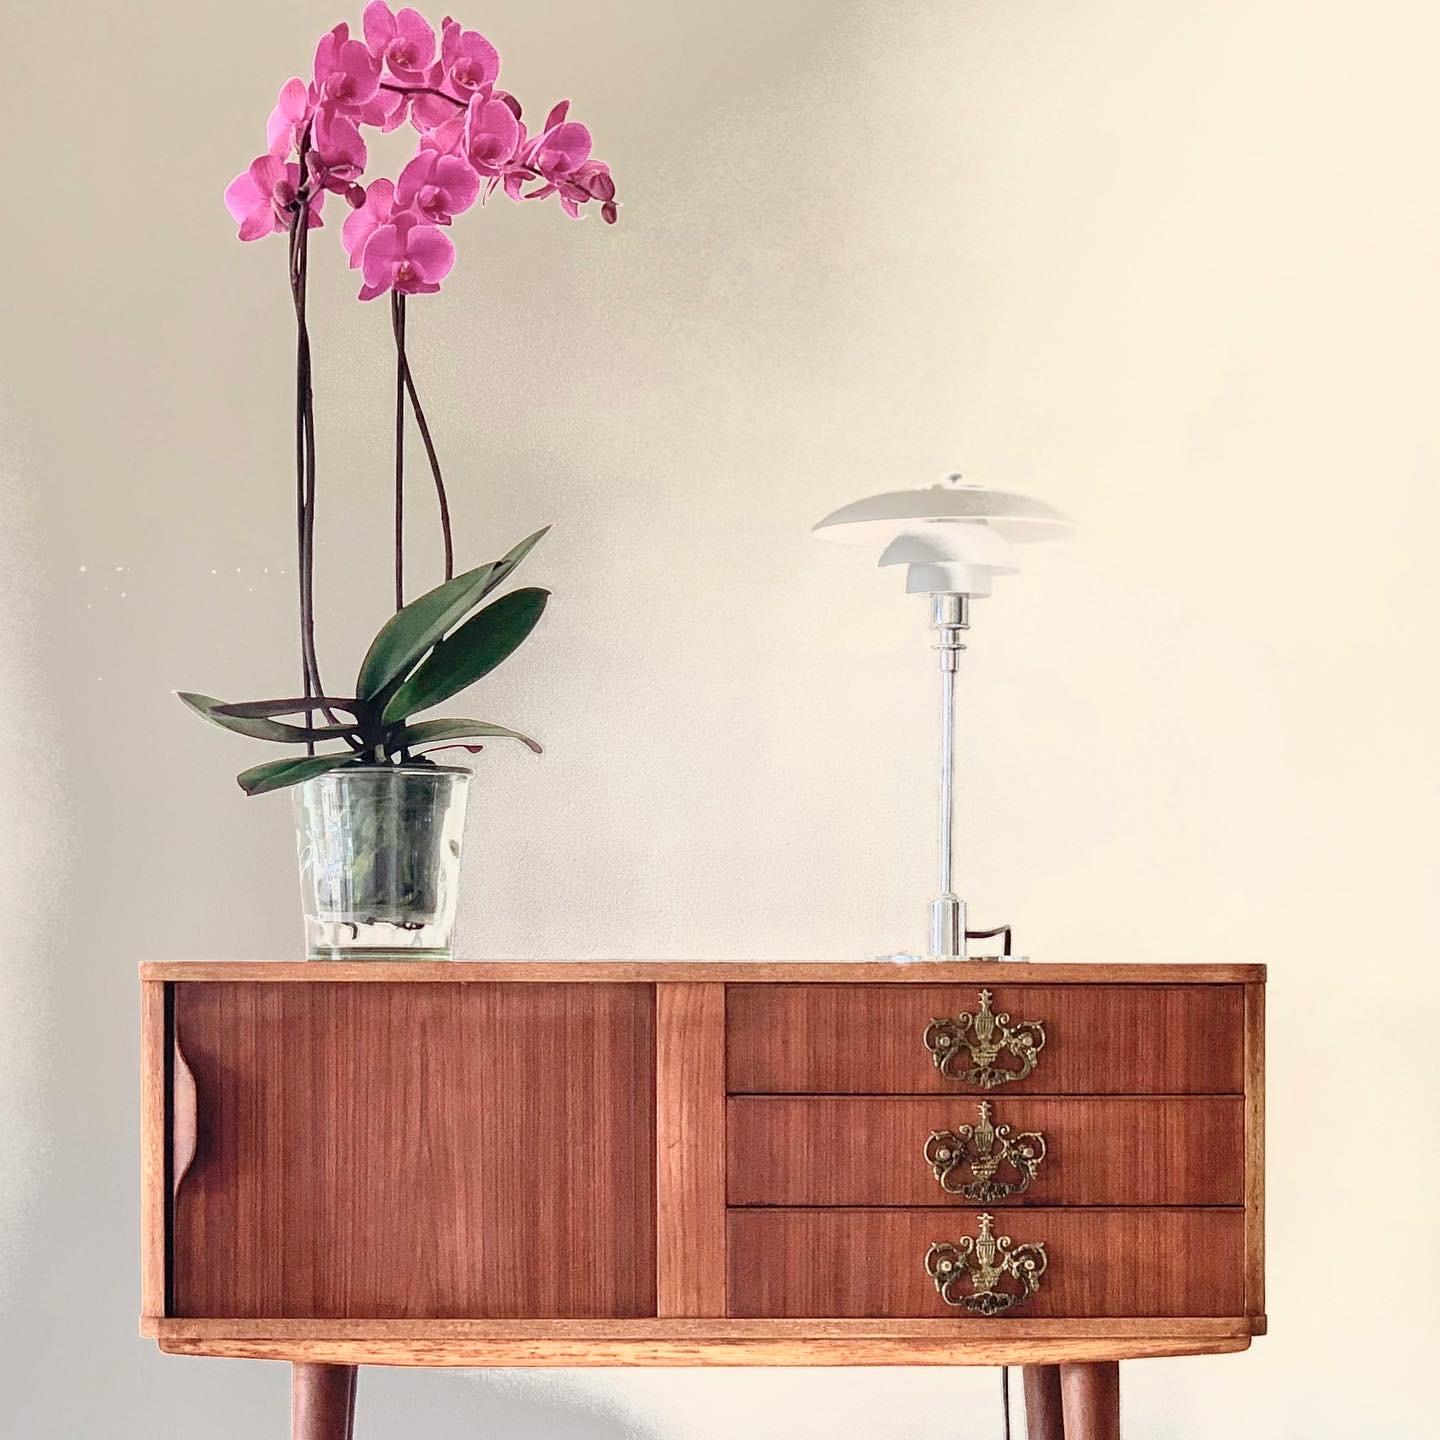 Small teak midcentury sideboard

- A versatile piece of furniture
- Top plate with round edges
- Tambour door with beautiful handle
- Tall tapered legs and beautiful wood grains.
- Danish architect, 1950s.

 